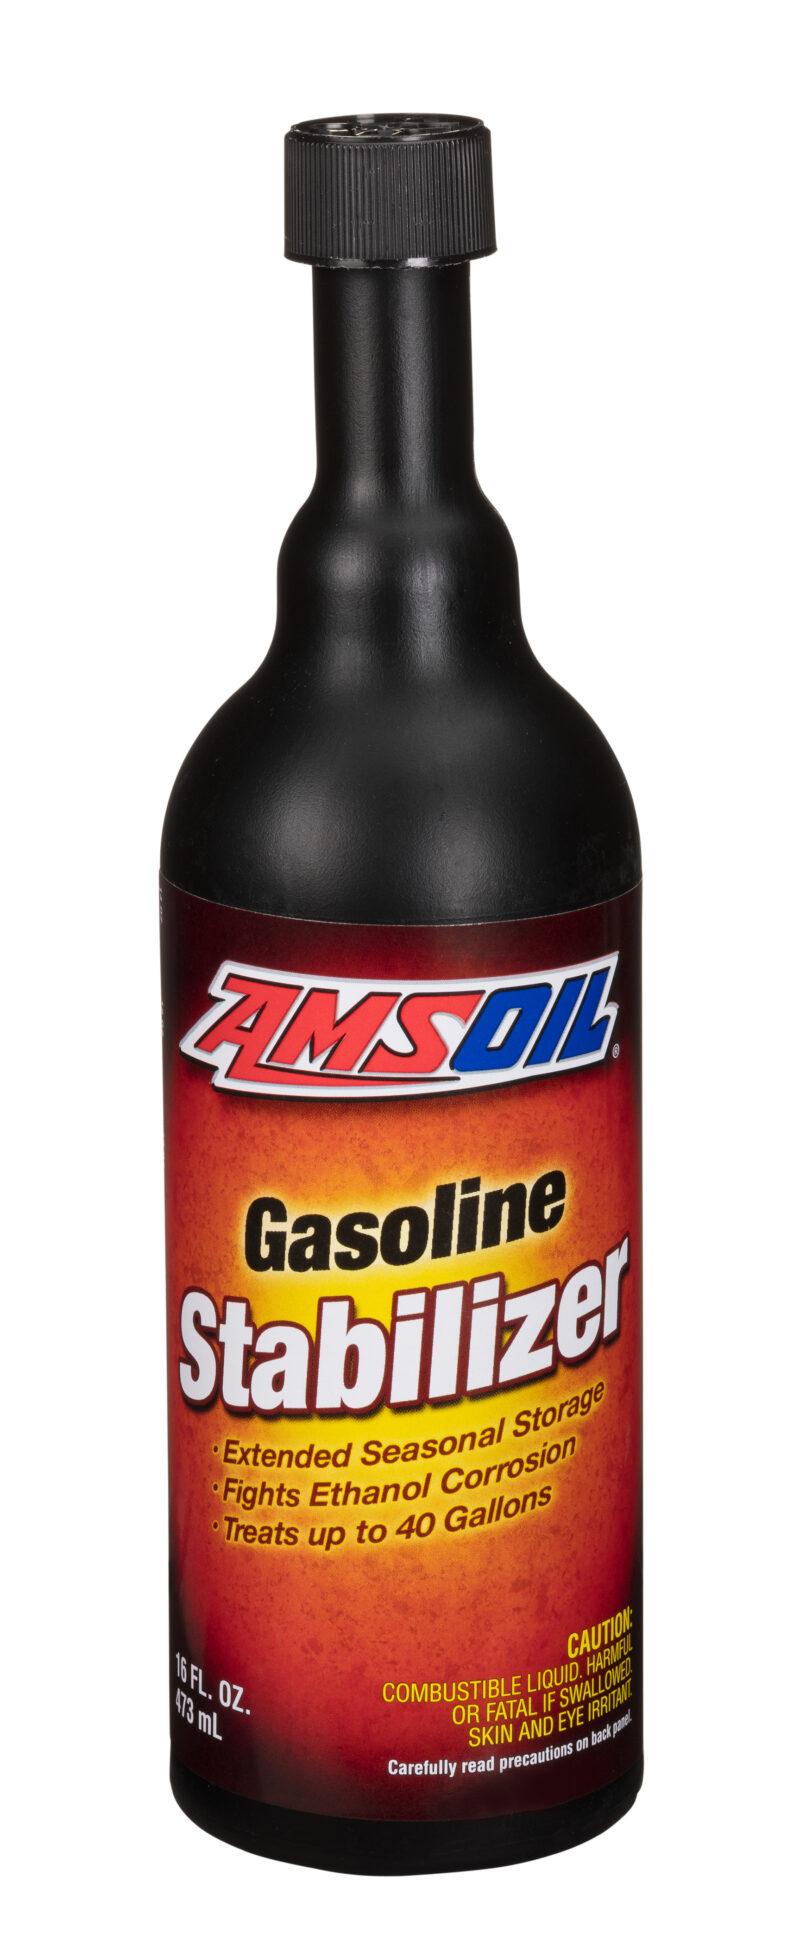 AMSOIL Gasoline Stabilizer - For Extended Seasonal Storage - Fights Ethanol Corrosion